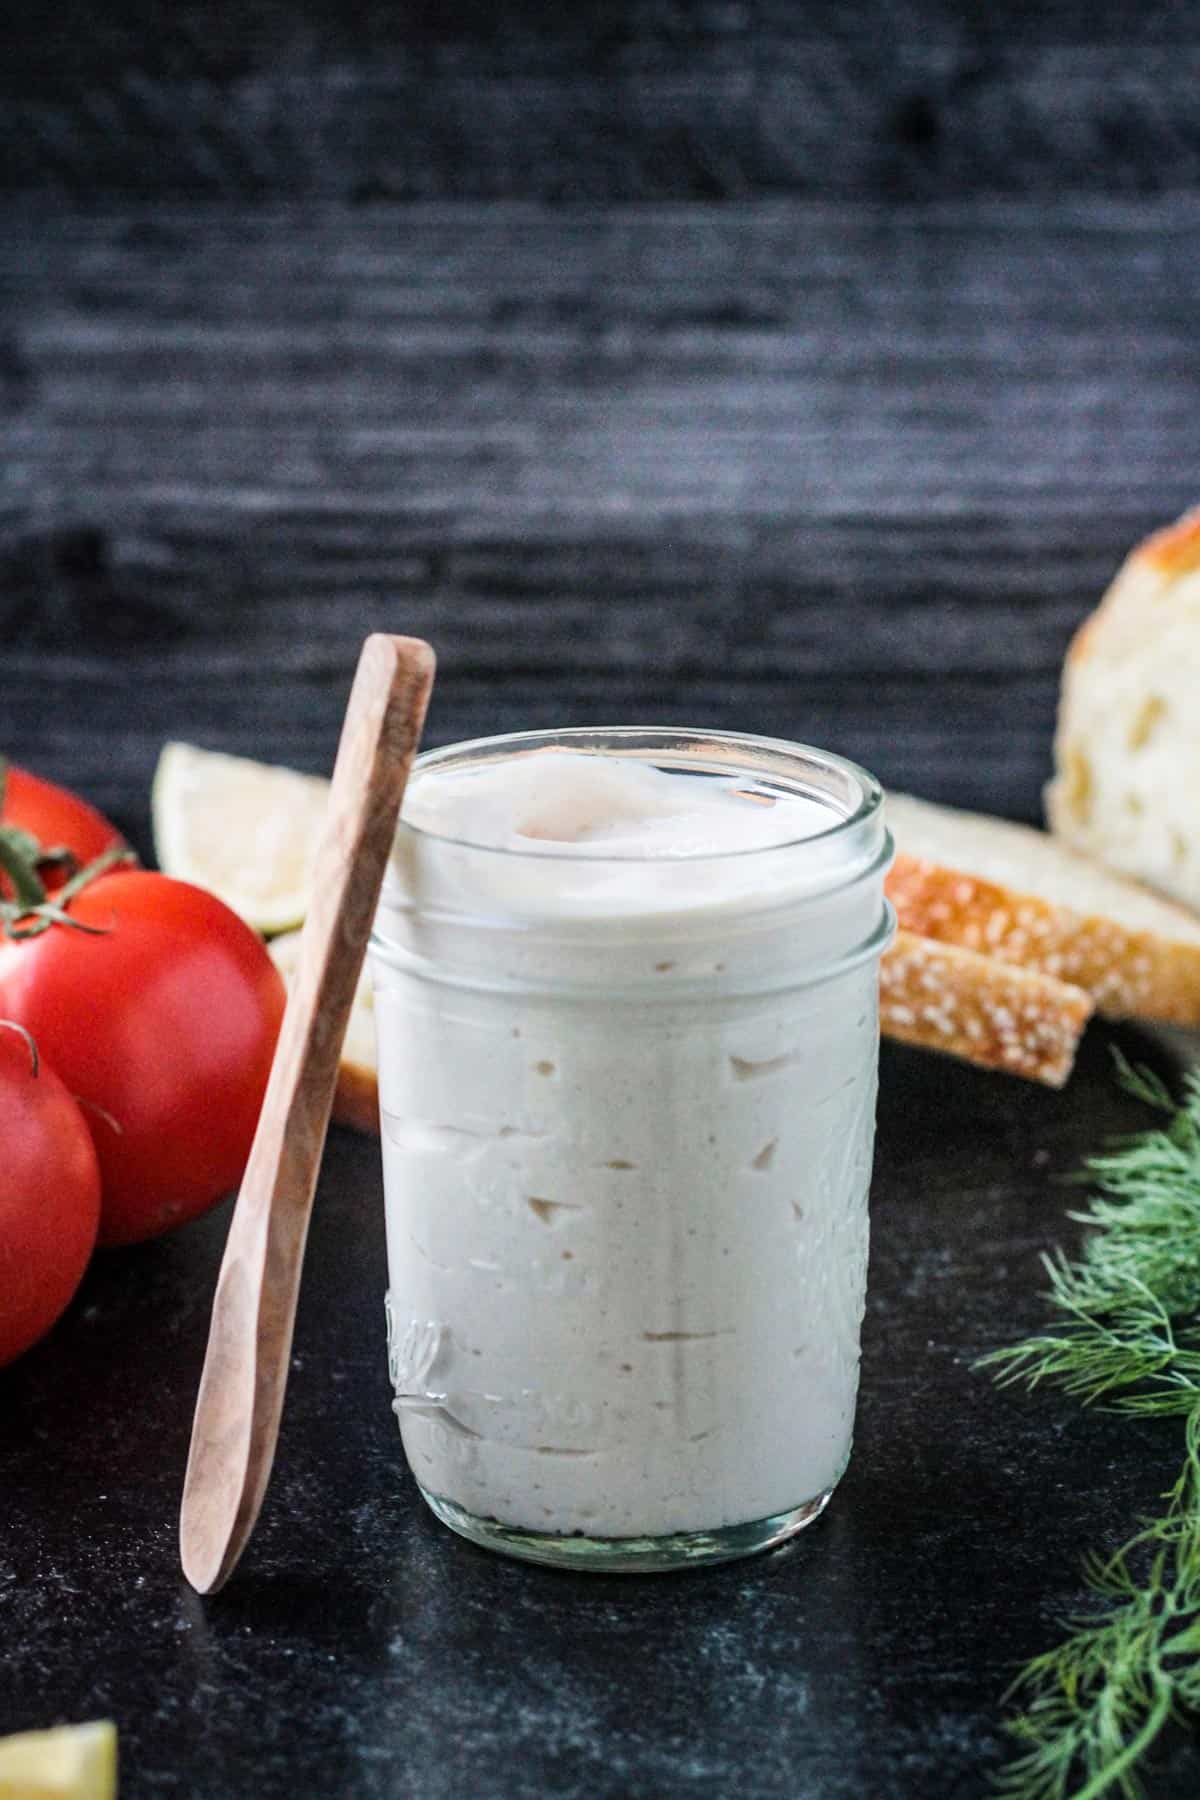 Small wooden spoon leaning against a jar of homemade vegan mayonnaise.